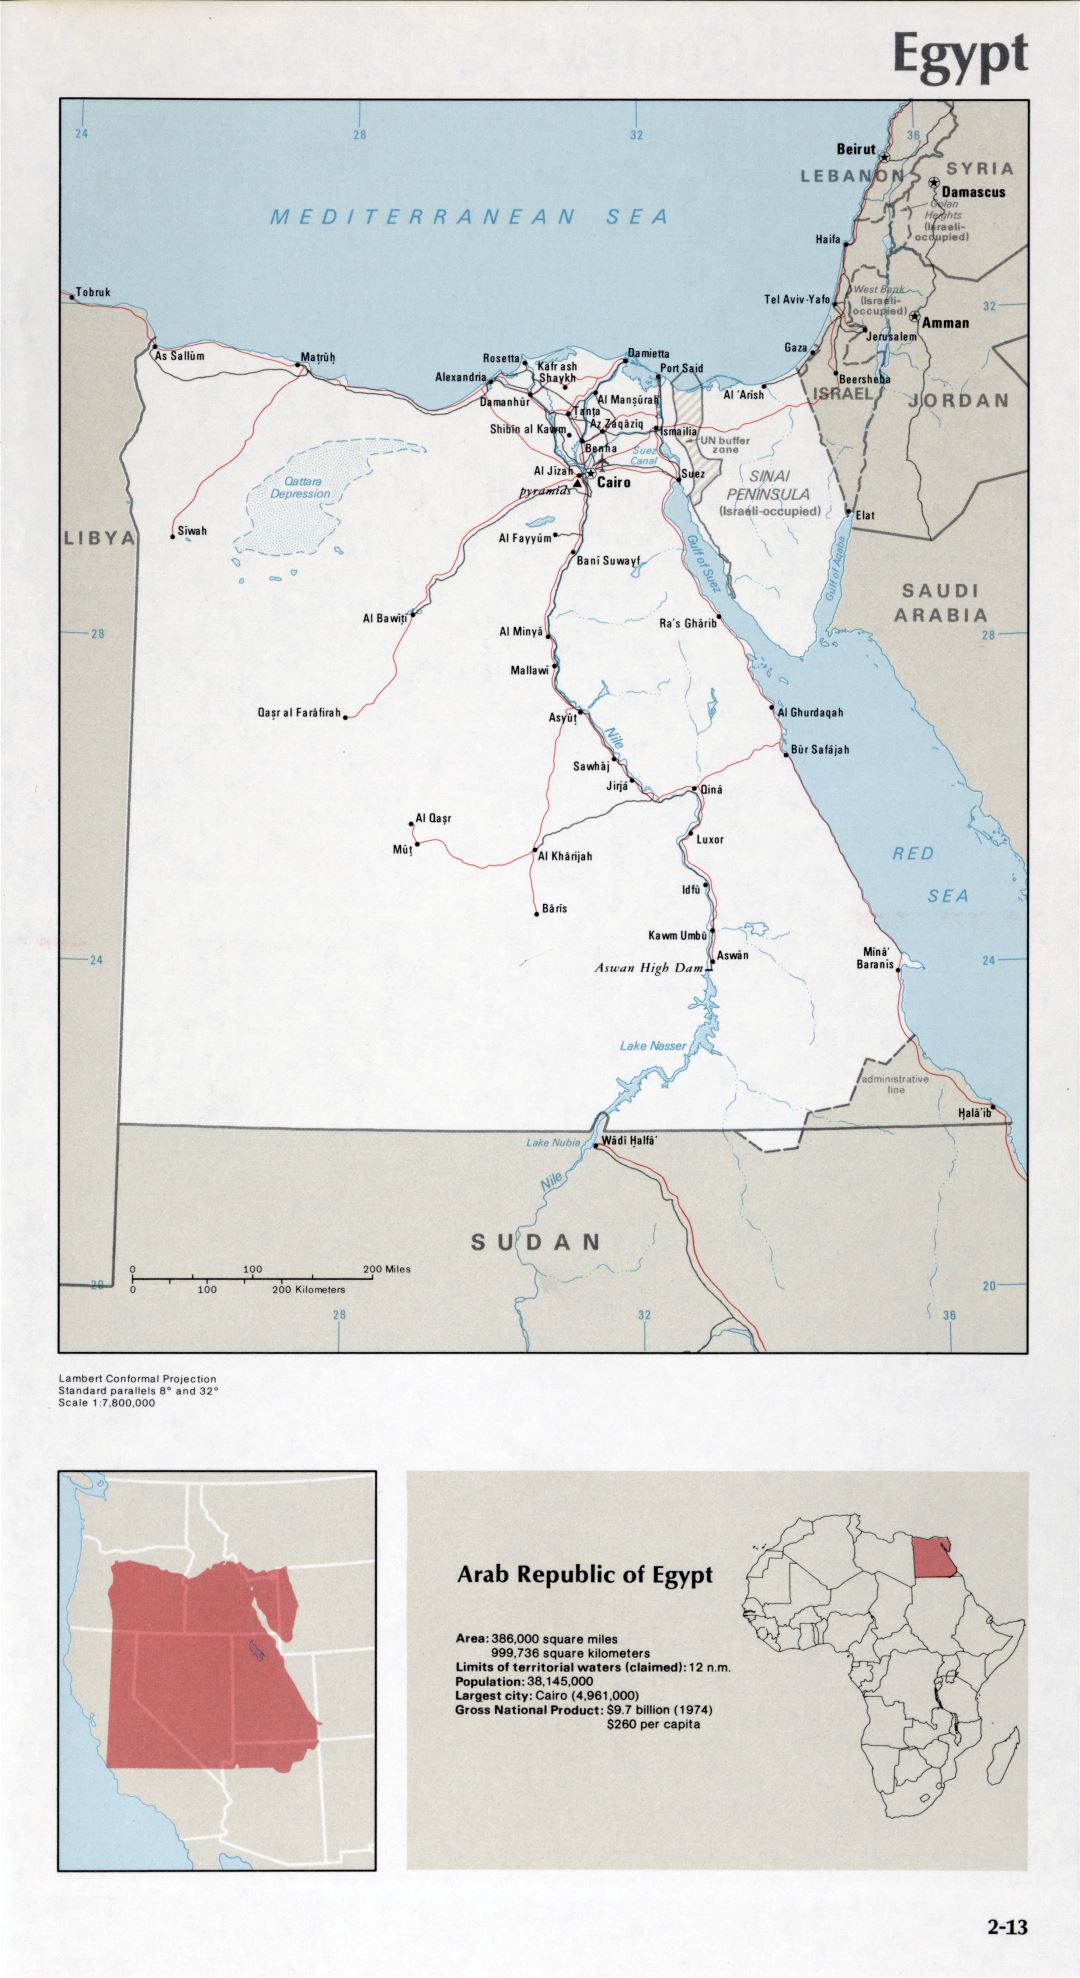 Map of Egypt (2-13)